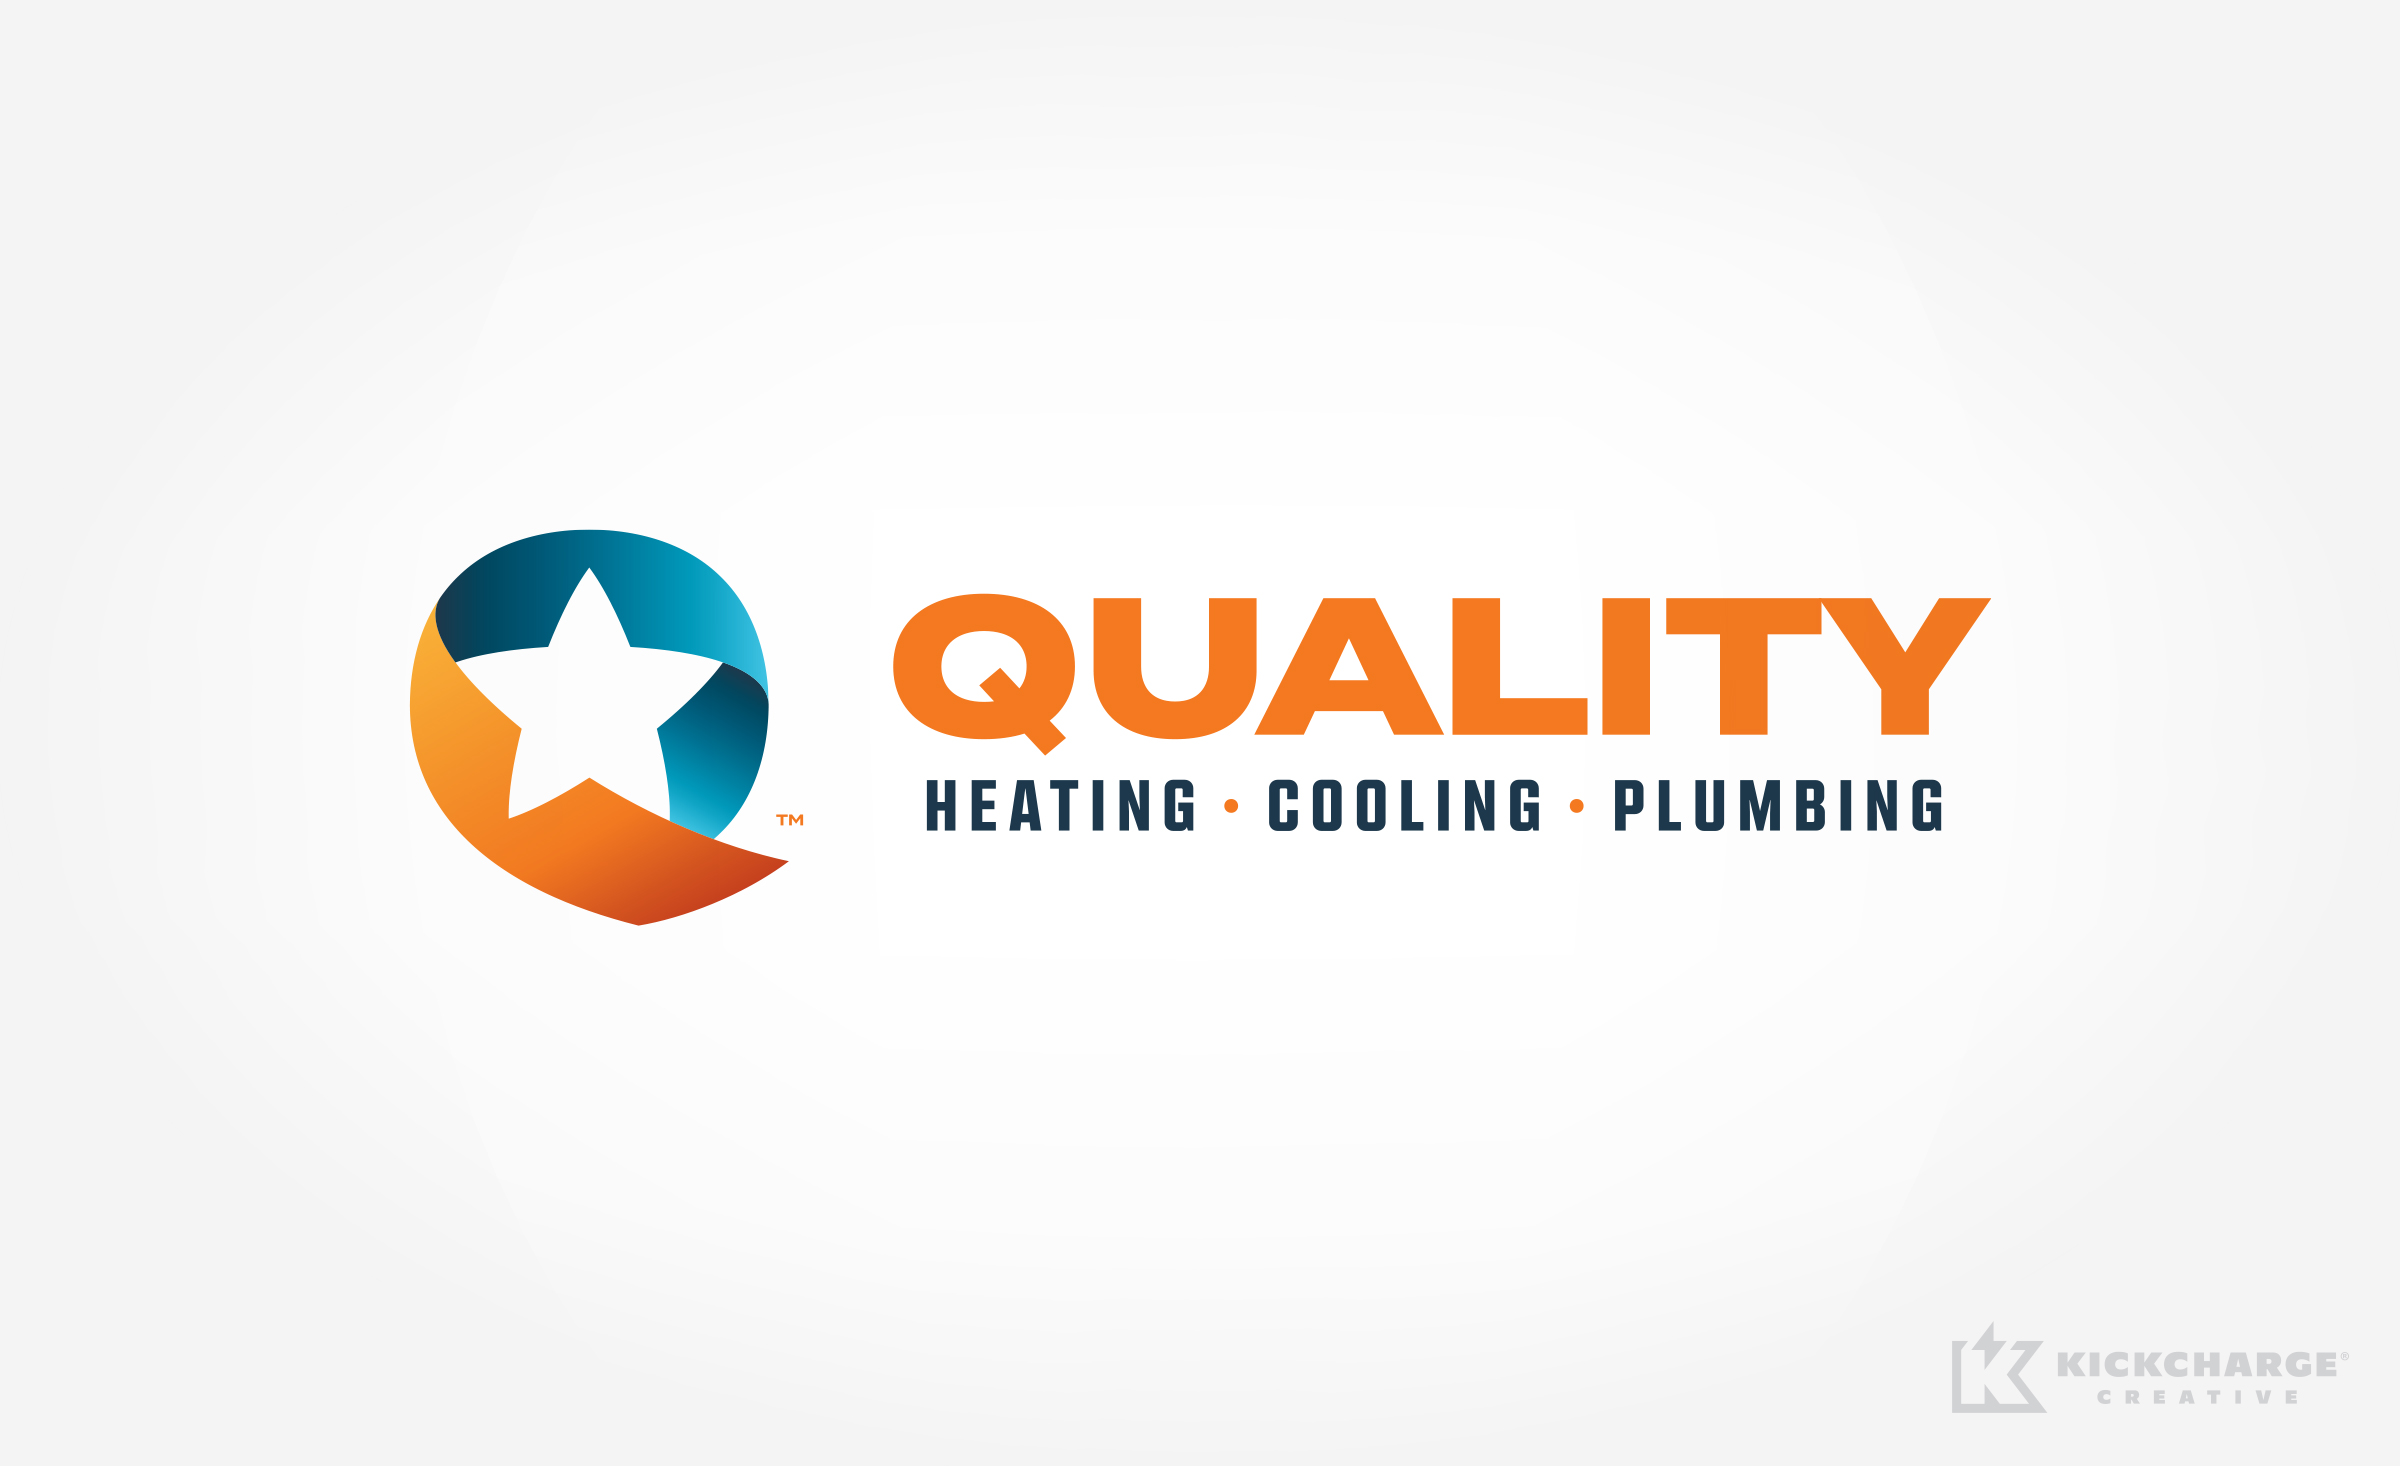 plumbing and hvac logo for Quality Heating, Cooling & Plumbing